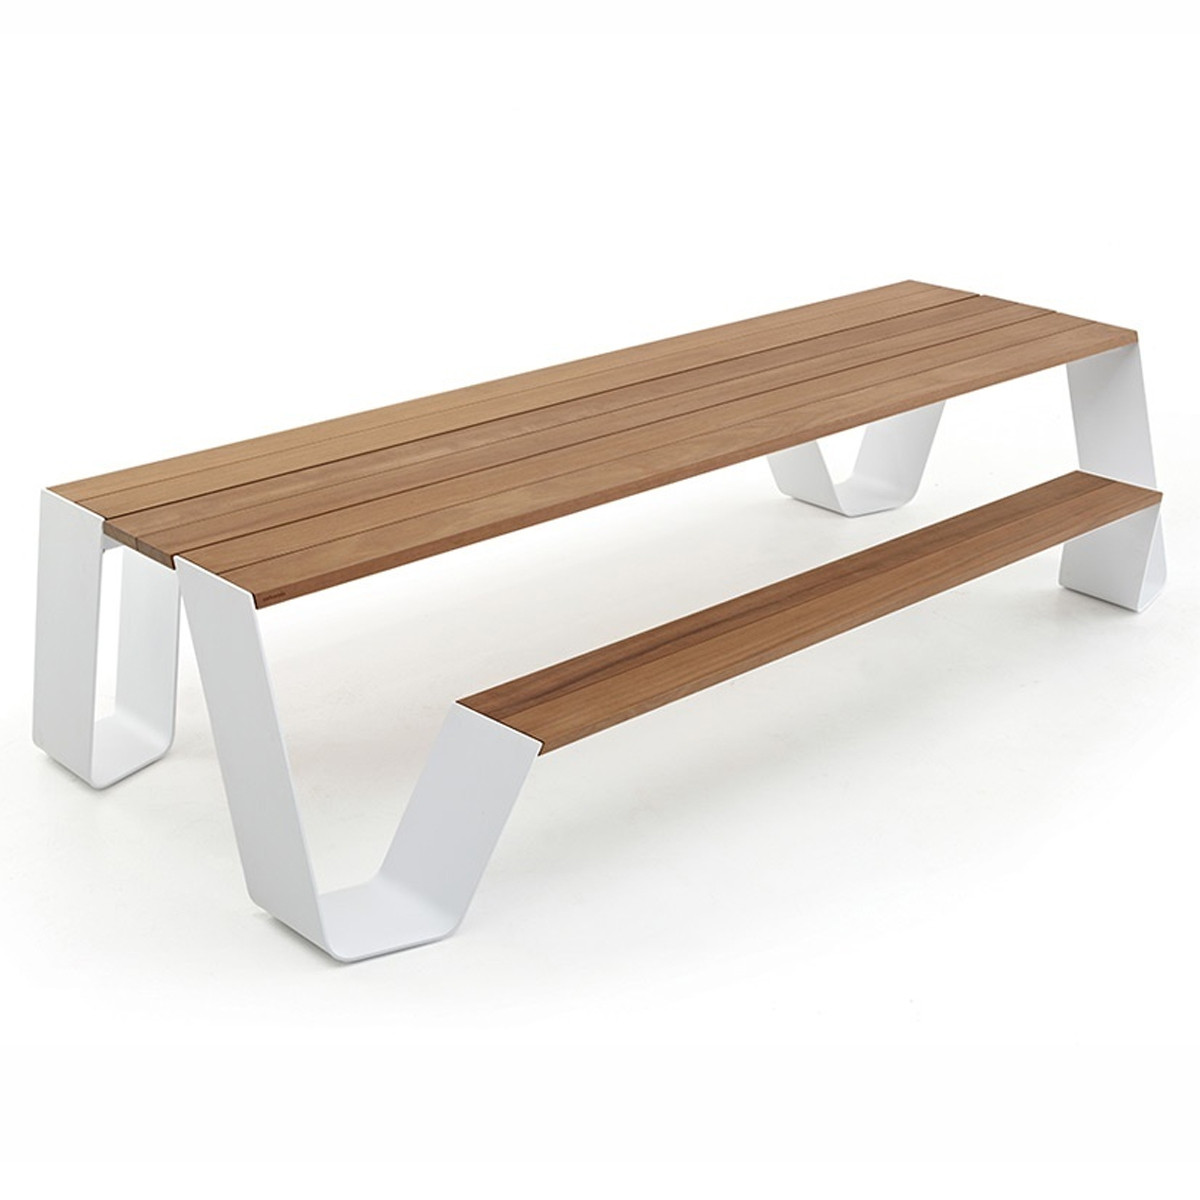 Extremis picnic table